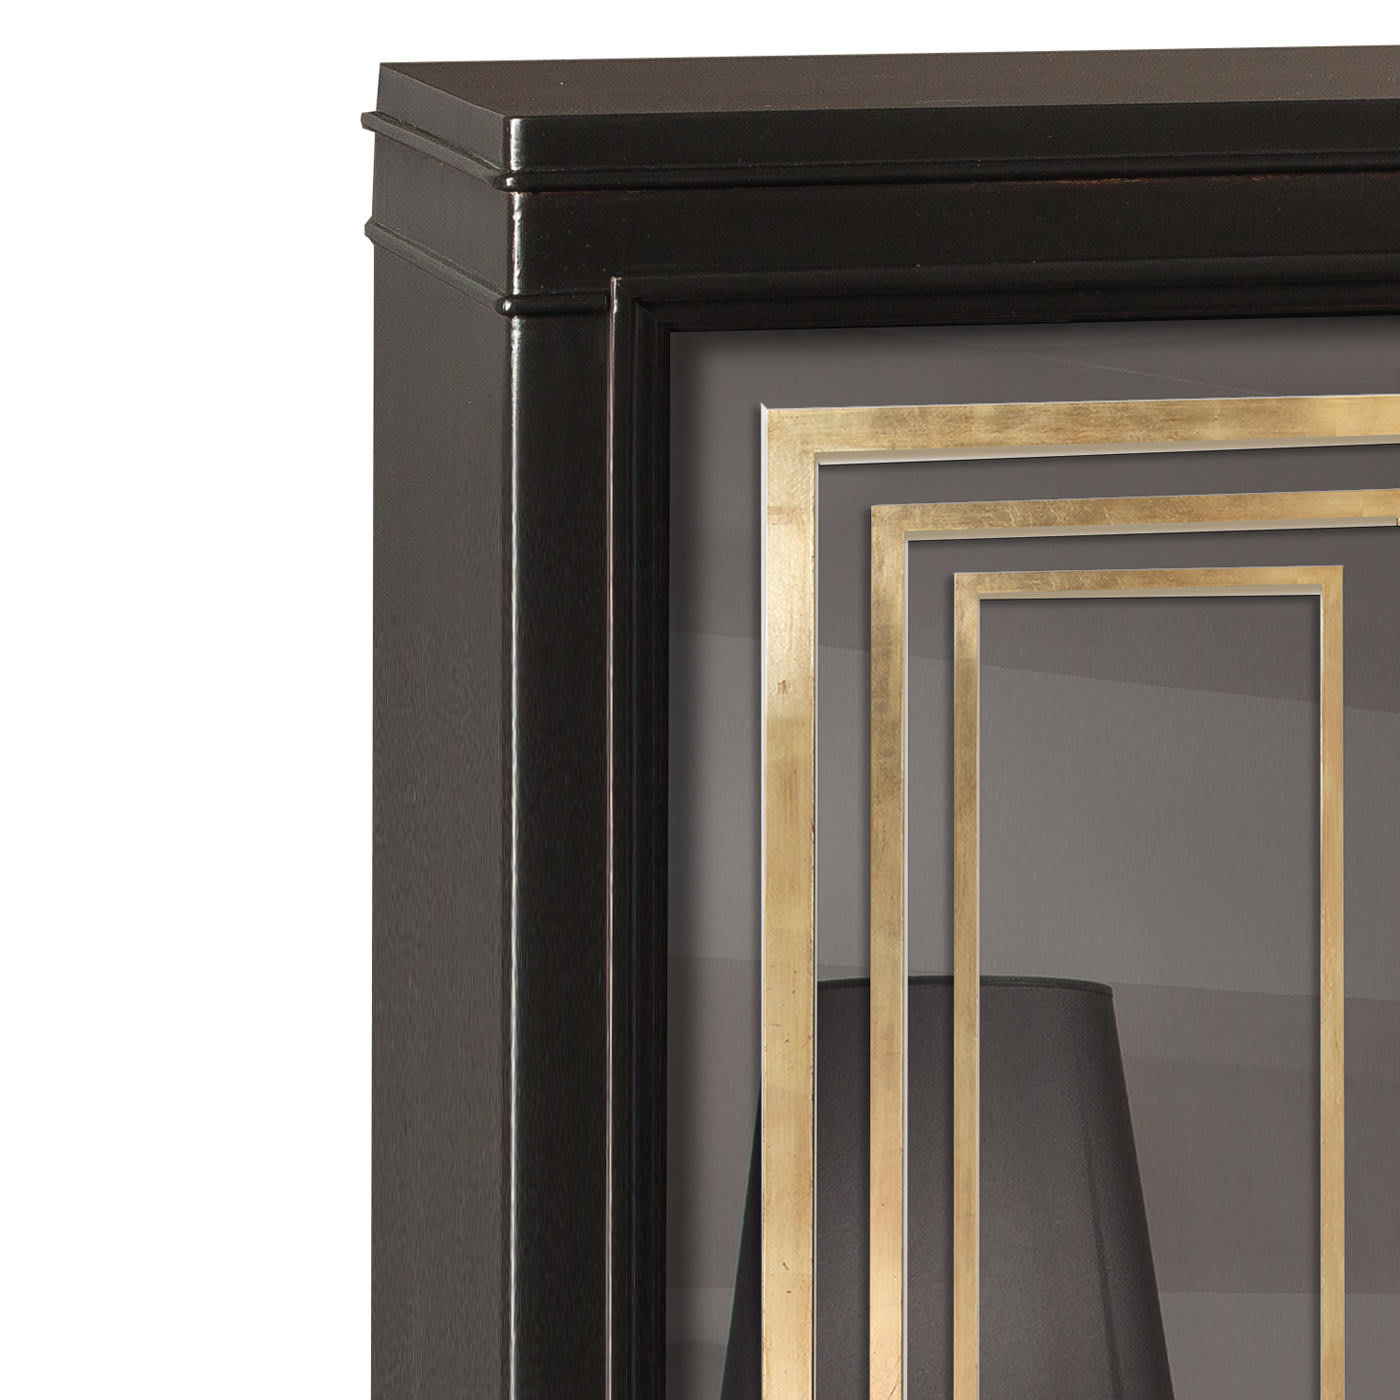 Olimpia Armoire with Mirror - Isabella Costantini